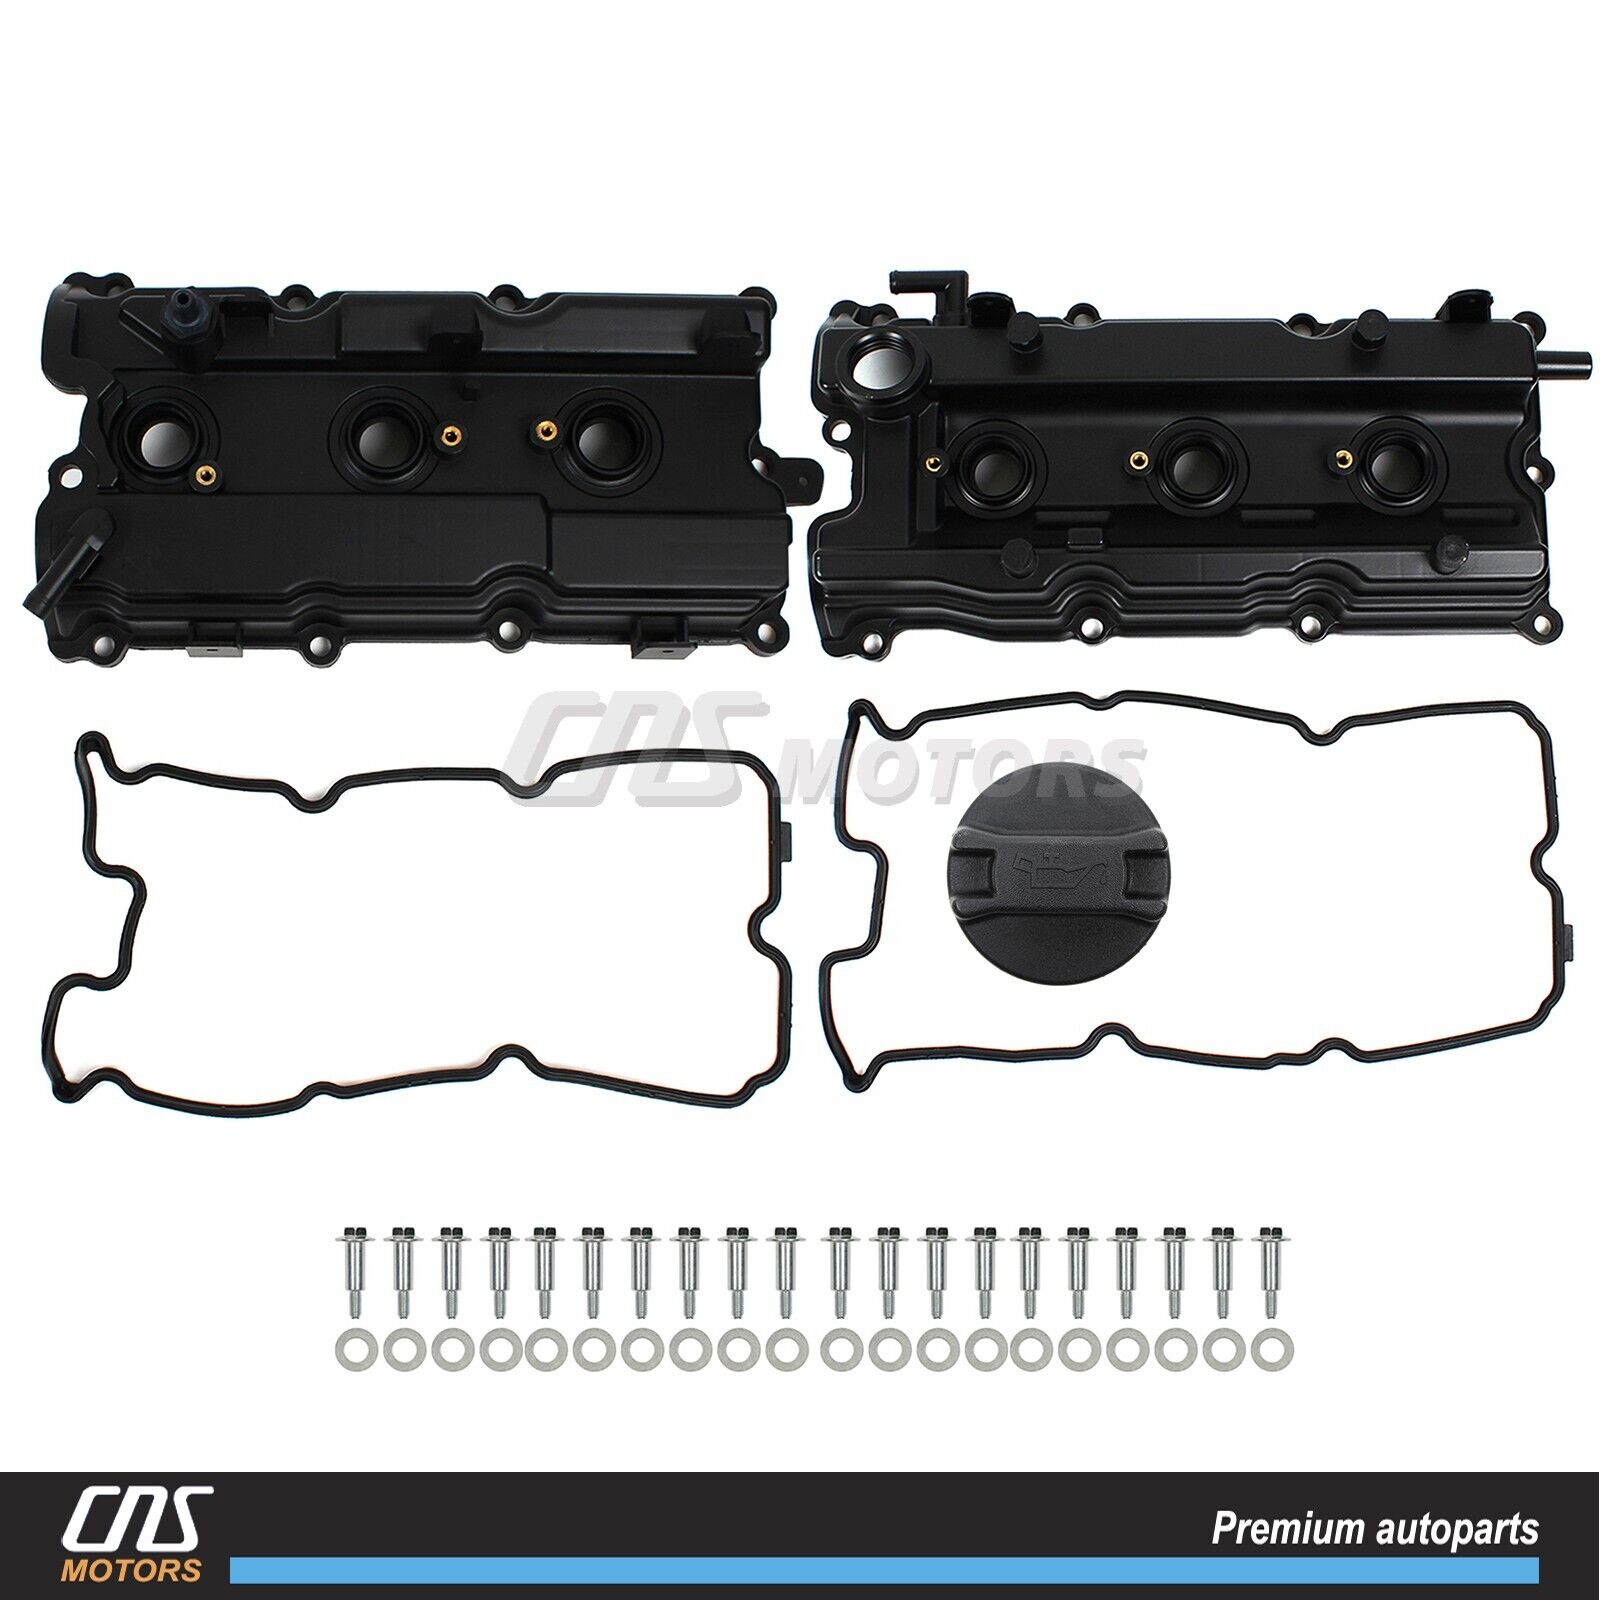 Valve Covers & Gasket Bolts for 02-09 NISSAN Altima Maxima Murano Quest I35 3.5L